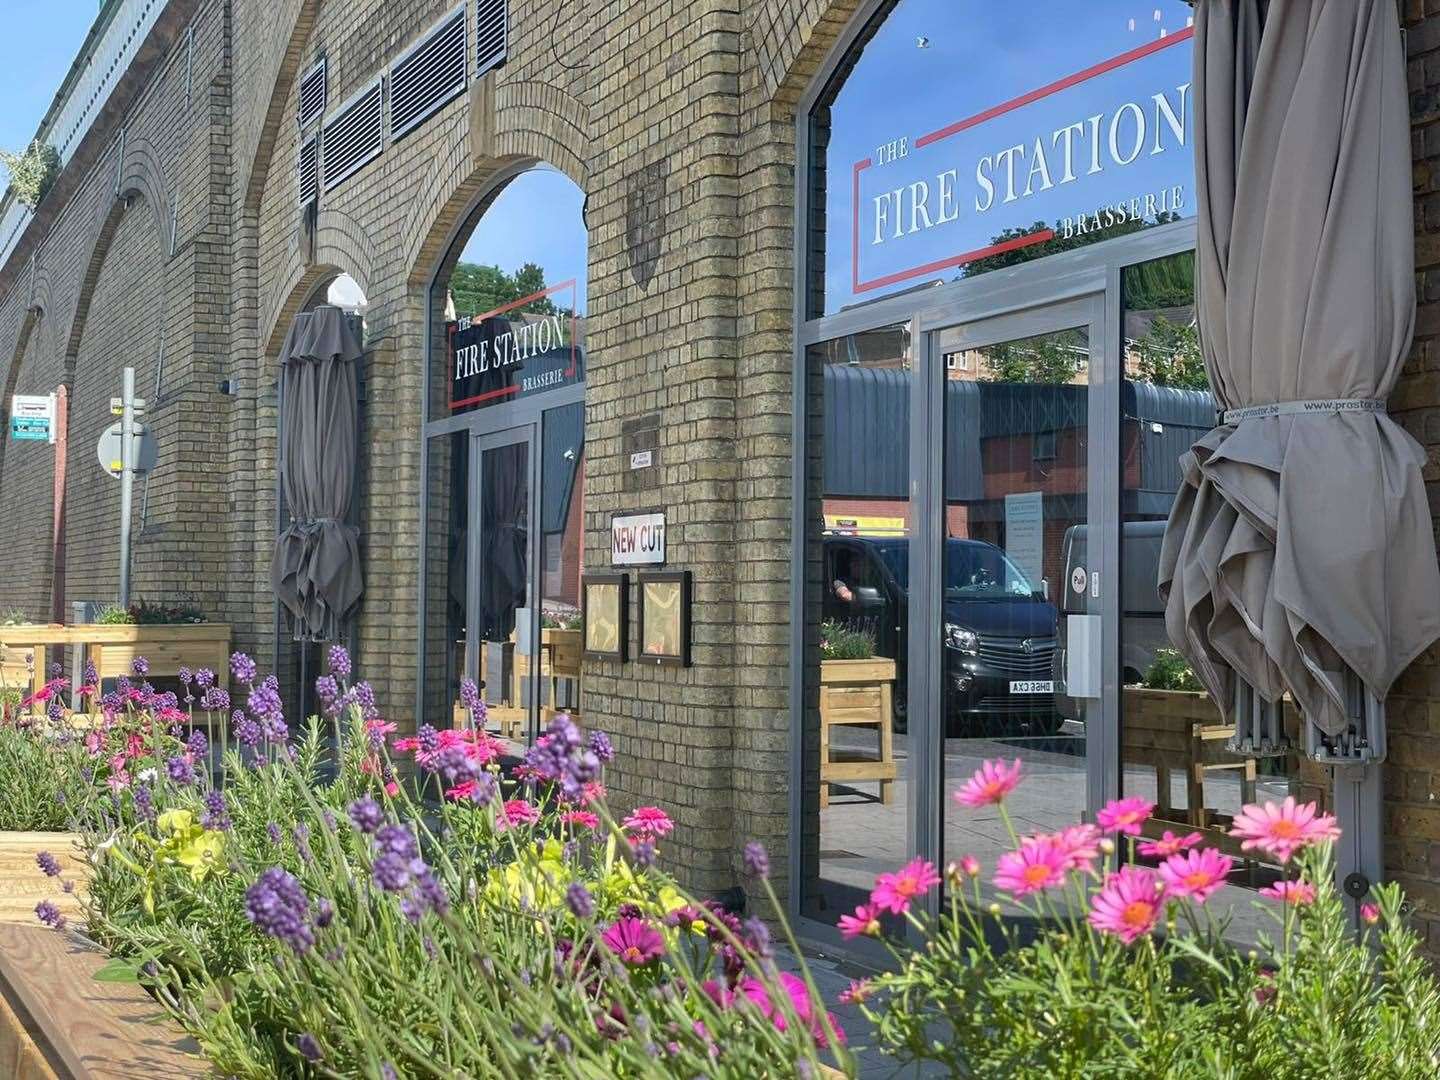 The Fire Station Brasserie in Chatham, which is also run by Ms Collins, was forced to close in June due to similar problems but has now reopened